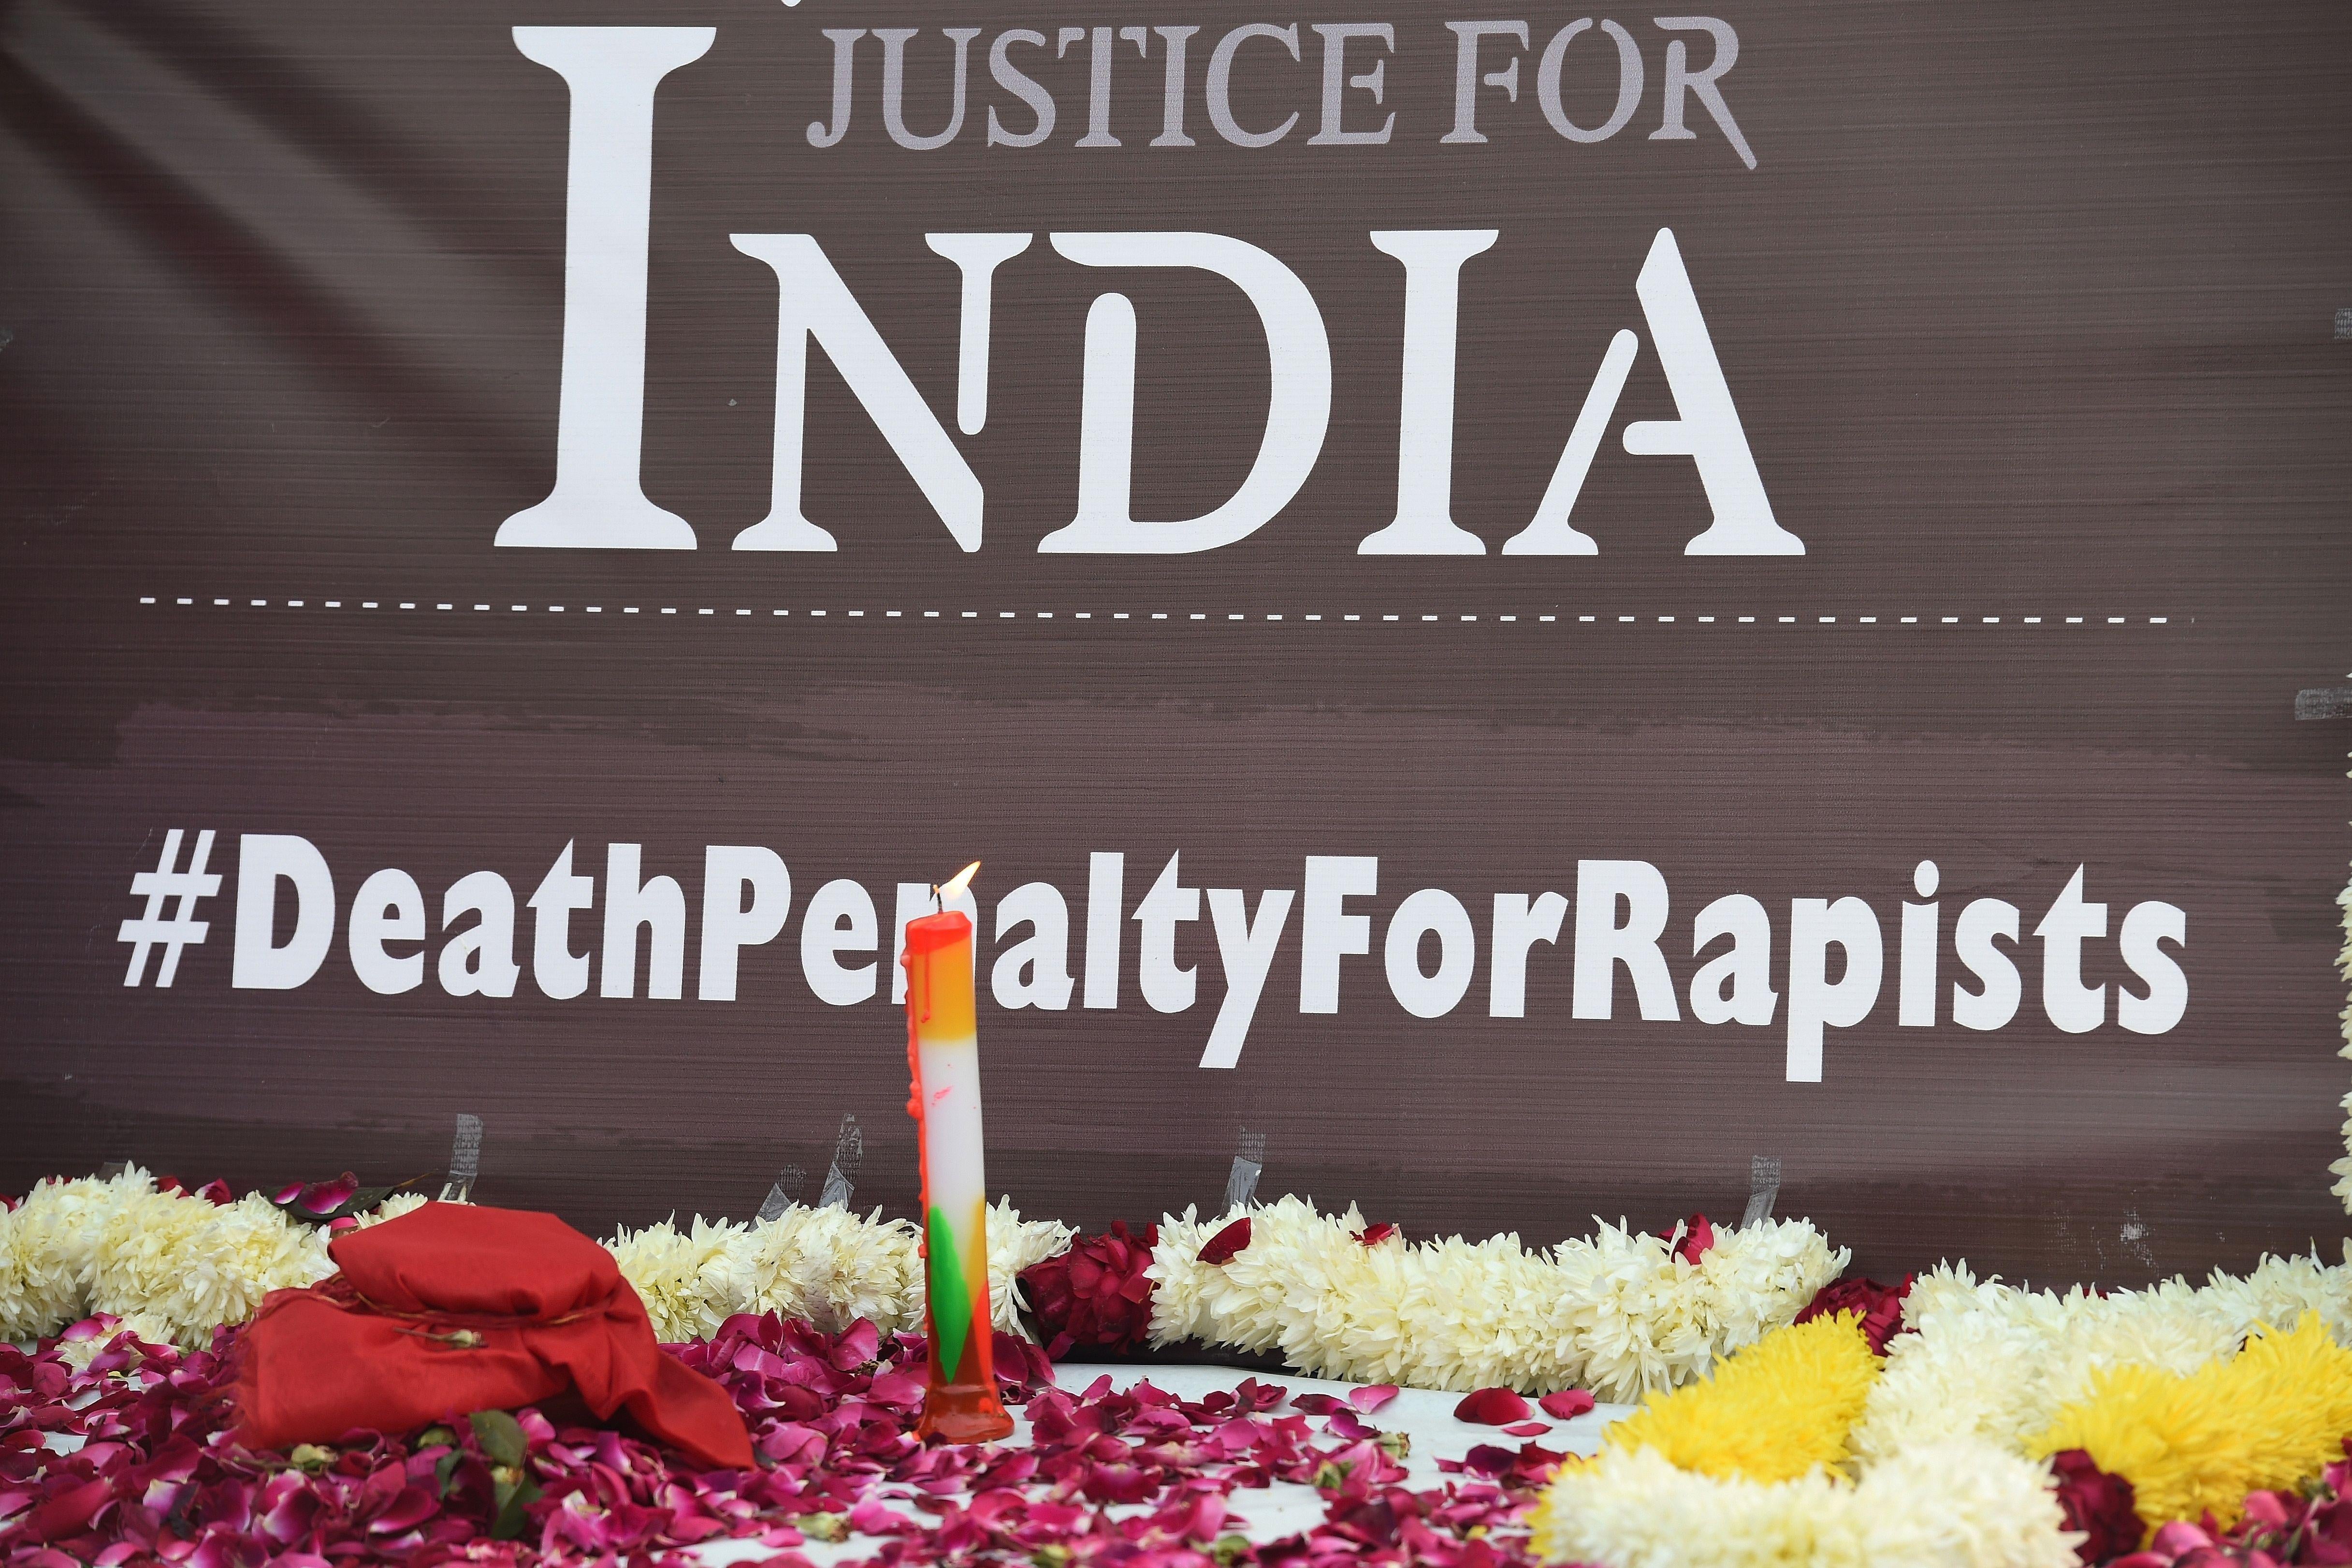 A candle lit by demonstrators is seen in front of a banner reading "Justice for India" and "#DeathPenaltyForRapists."